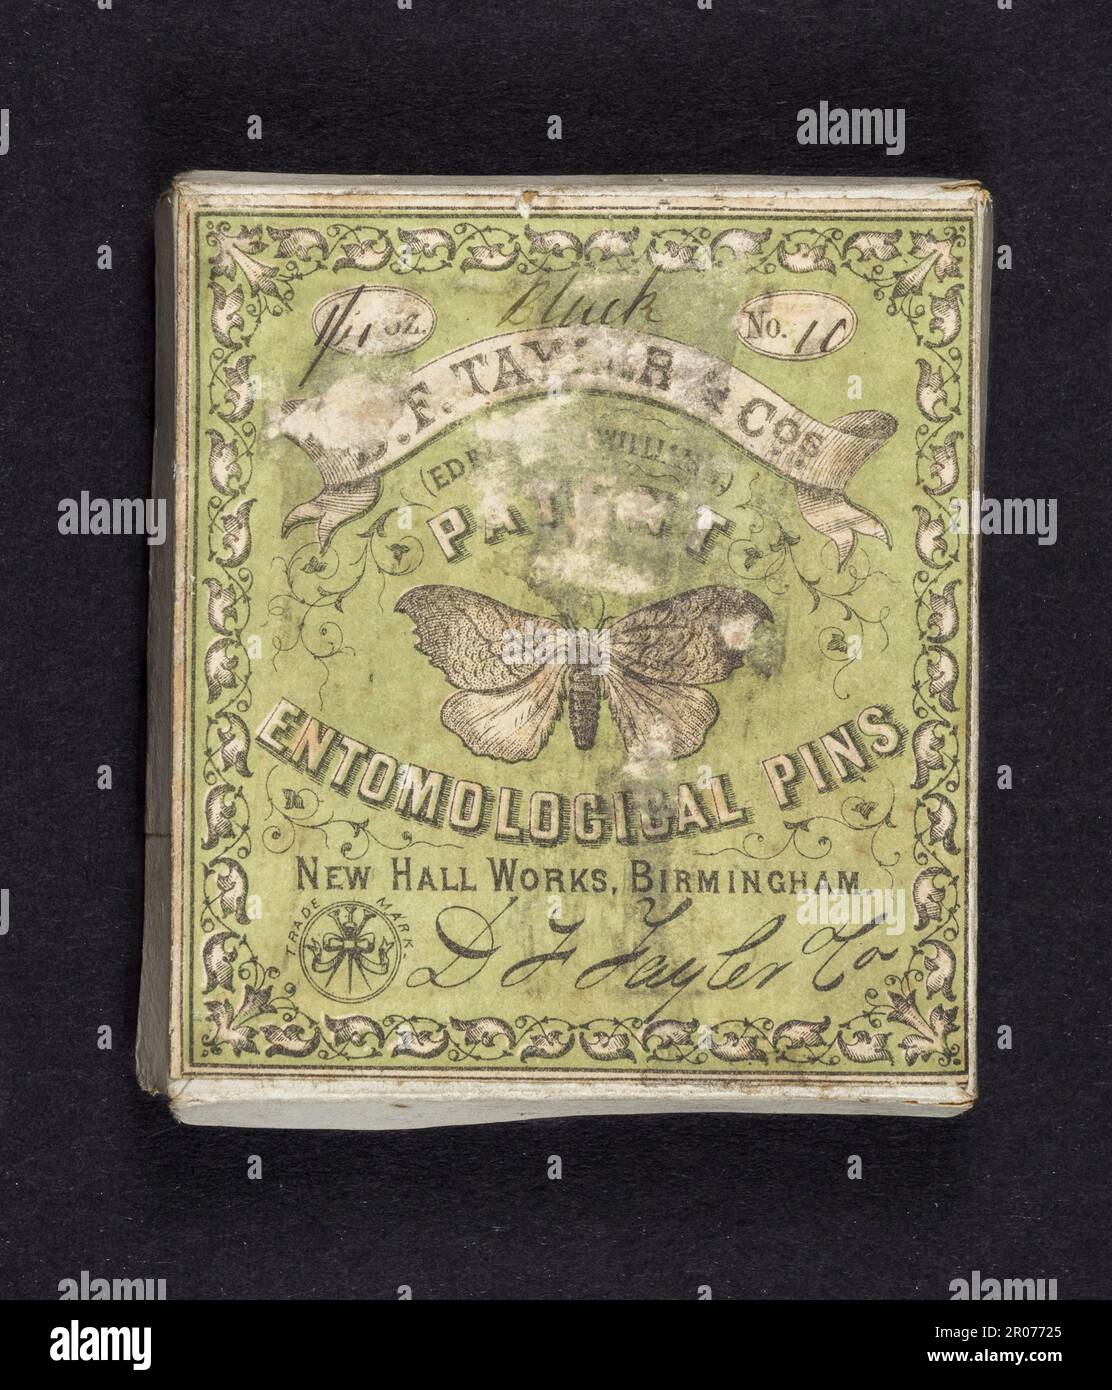 Antique entomological pins manufactured by DF Tayler & Co used to display insects, London, UK. Stock Photo